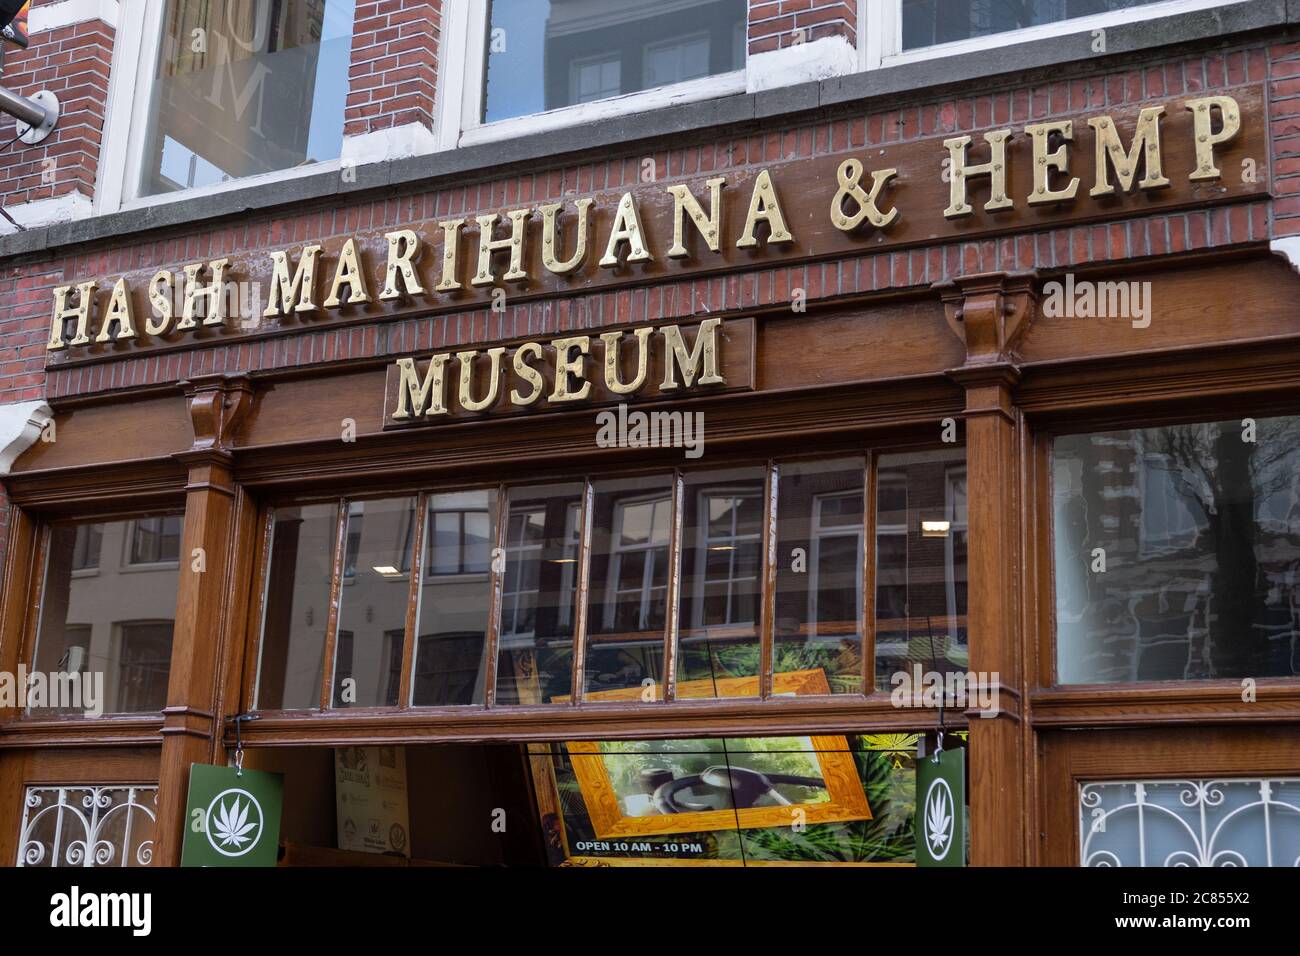 Amsterdam, Netherlands - January 15 2019: The Hash Marihuana and Hemp Museum on the edge of the De Wallen Red Light District of Amsterdam. Stock Photo